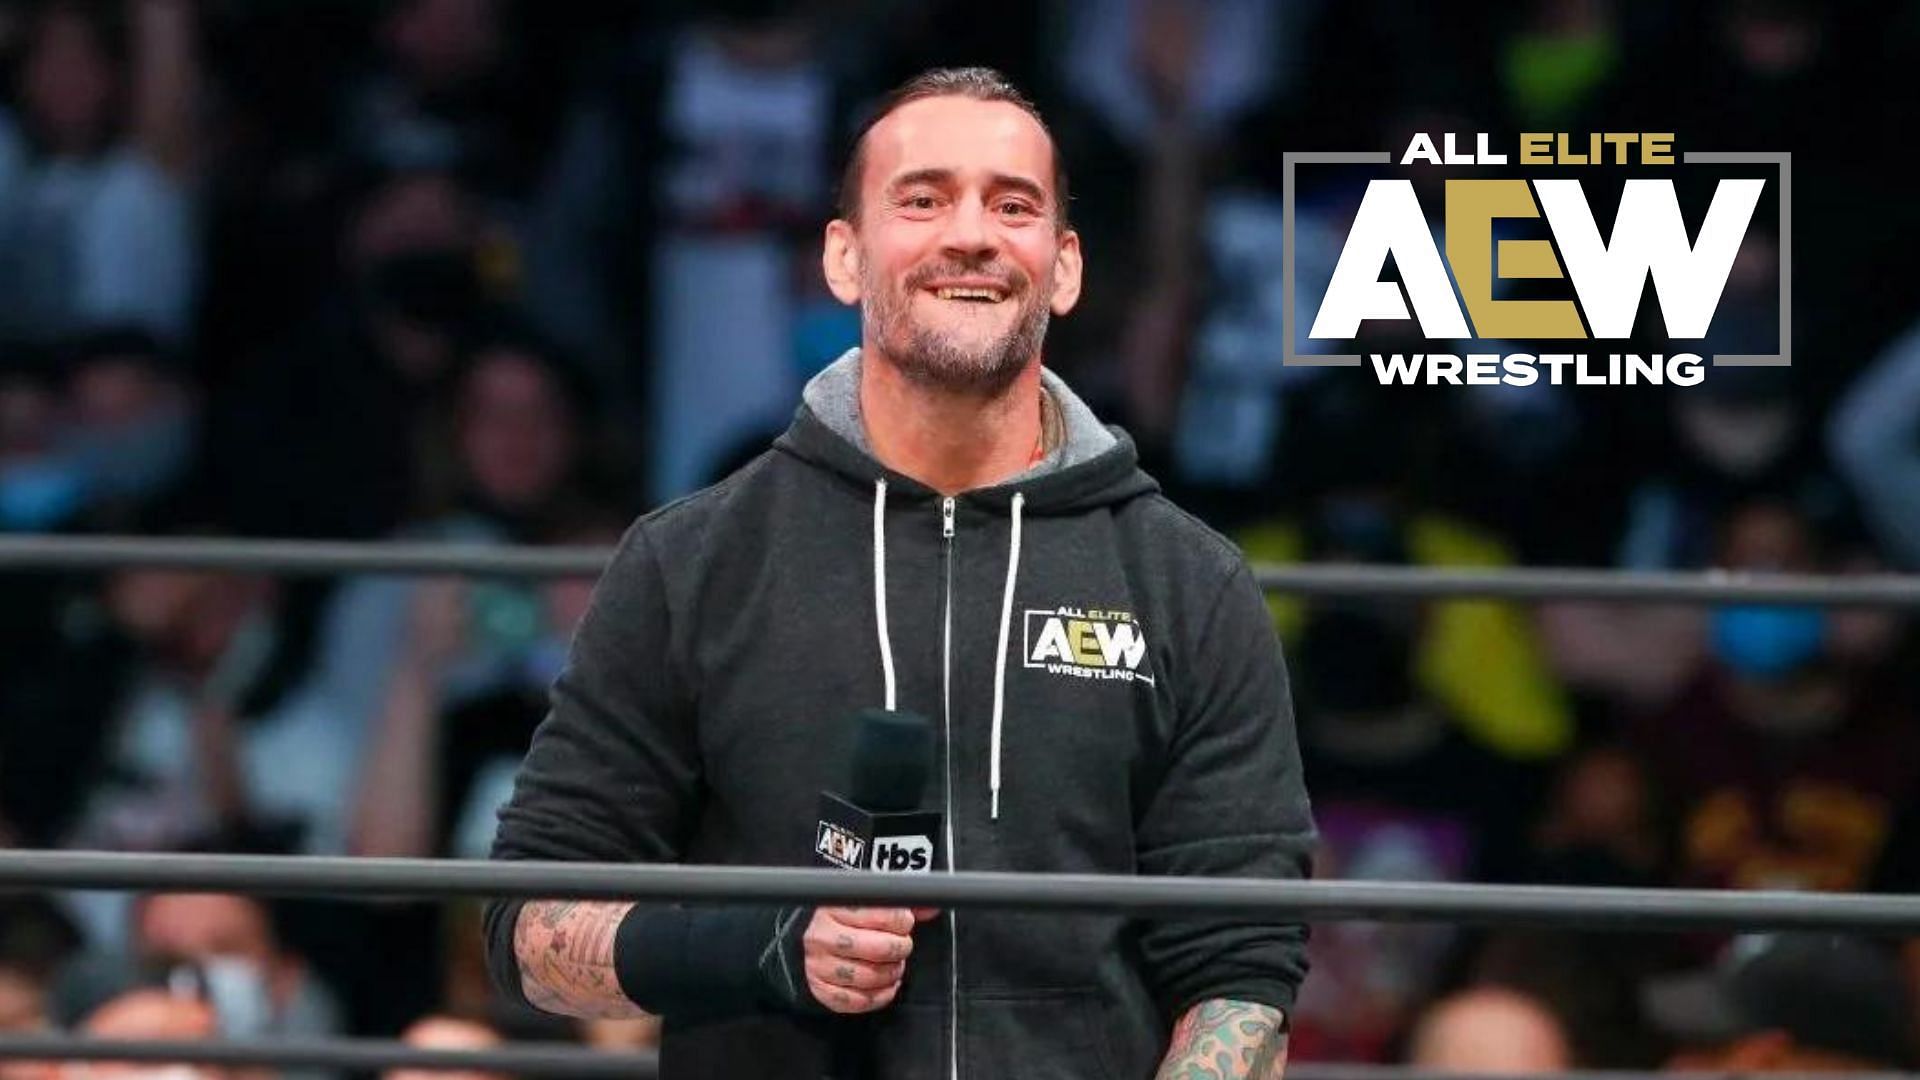 CM Punk won the AEW world champion at Double or Nothing